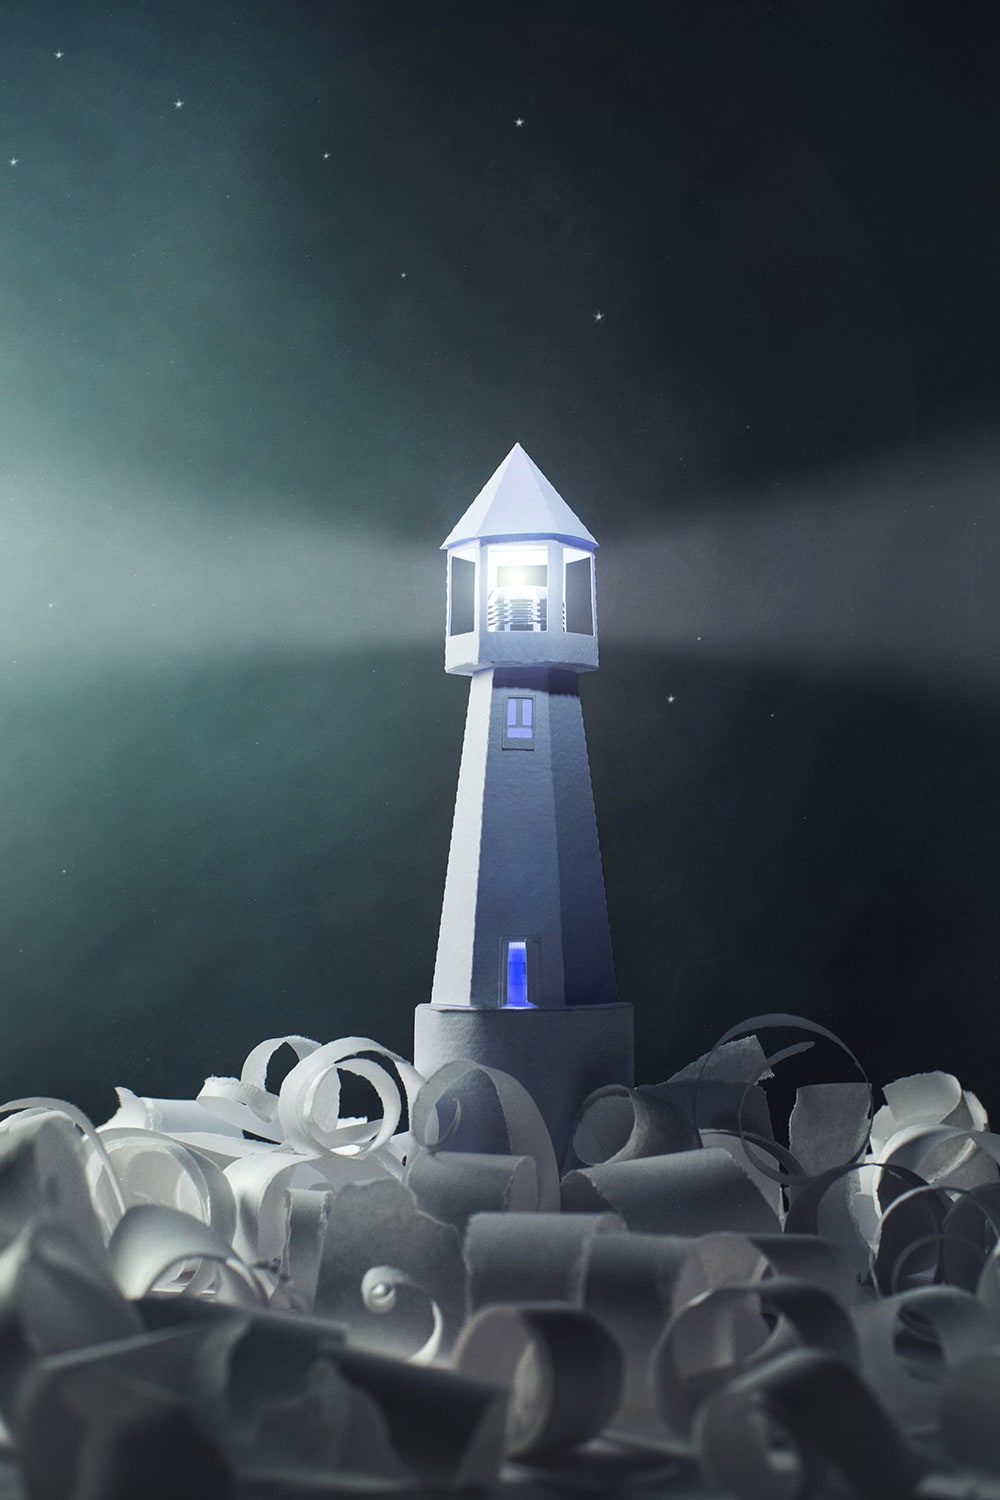 The Lighthouse A paper lighthouse beams light out over rough paper seas